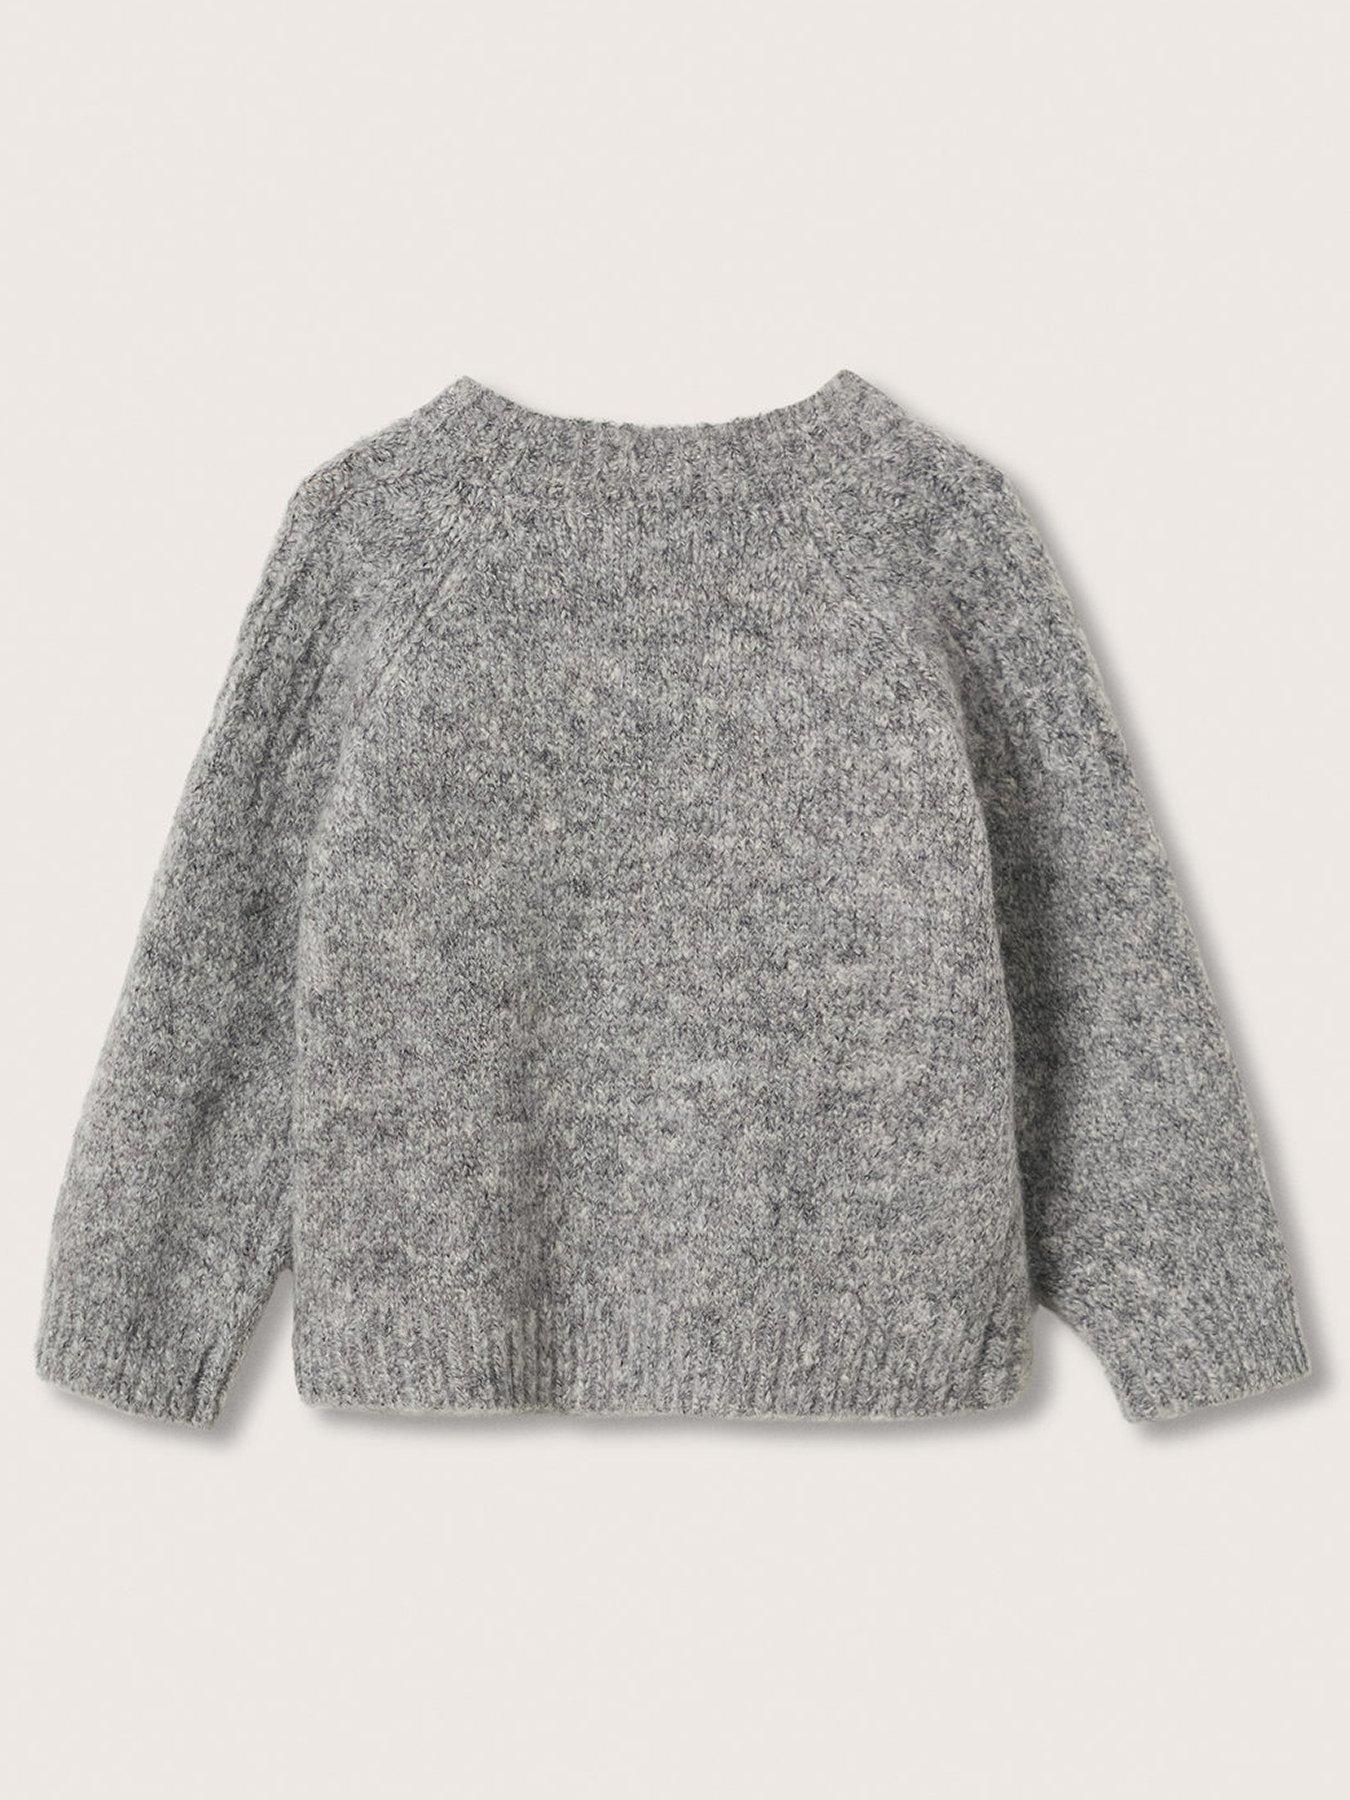 Mango Baby Boys Knitted Button Jumper | very.co.uk